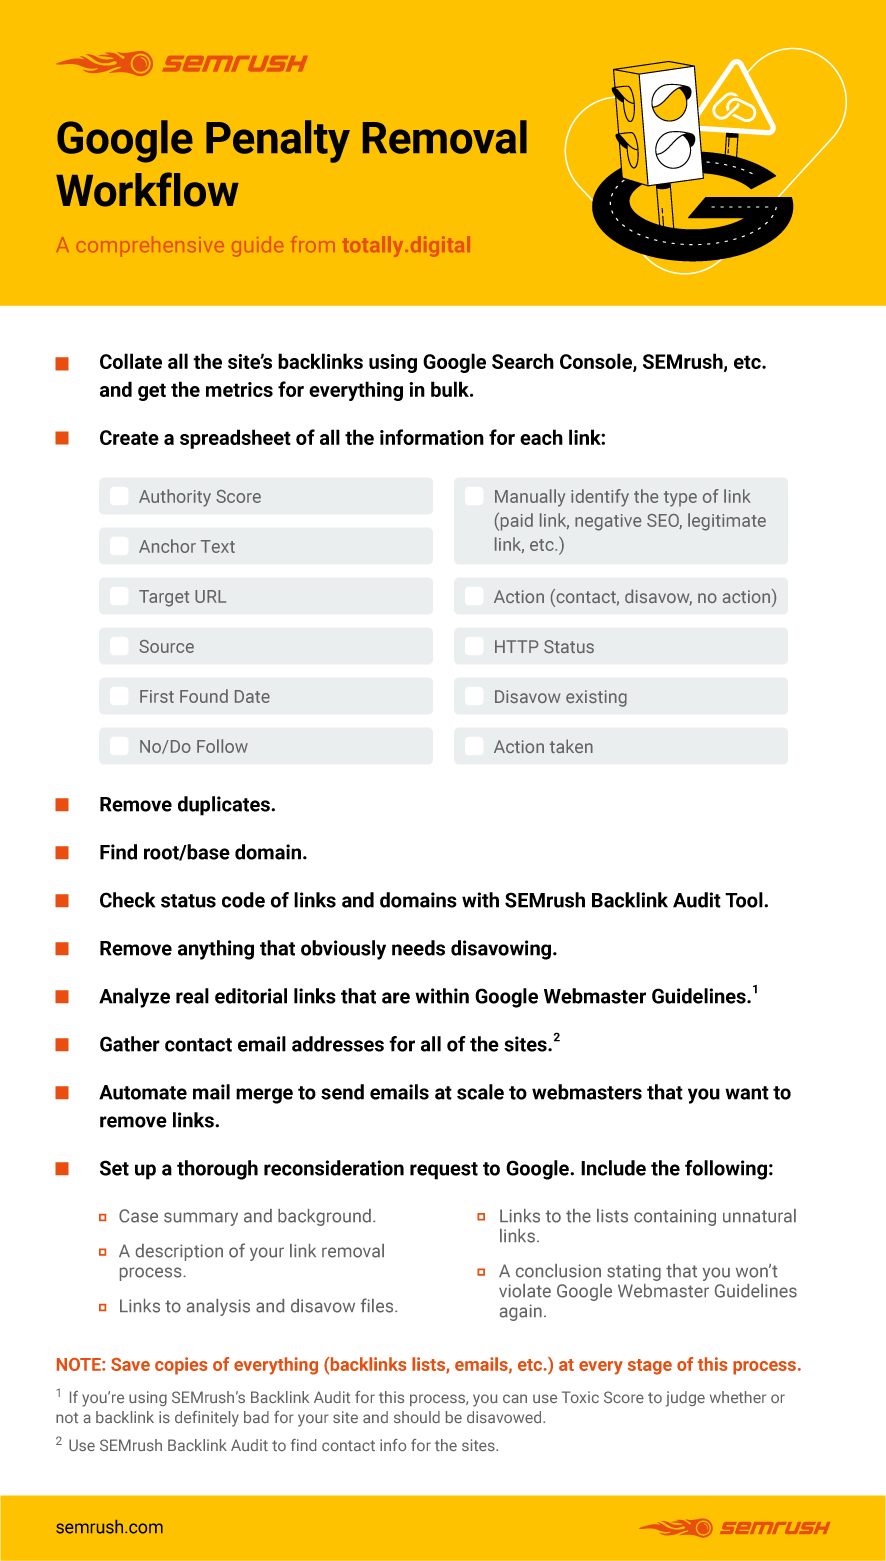 Google Penalty removal workflow